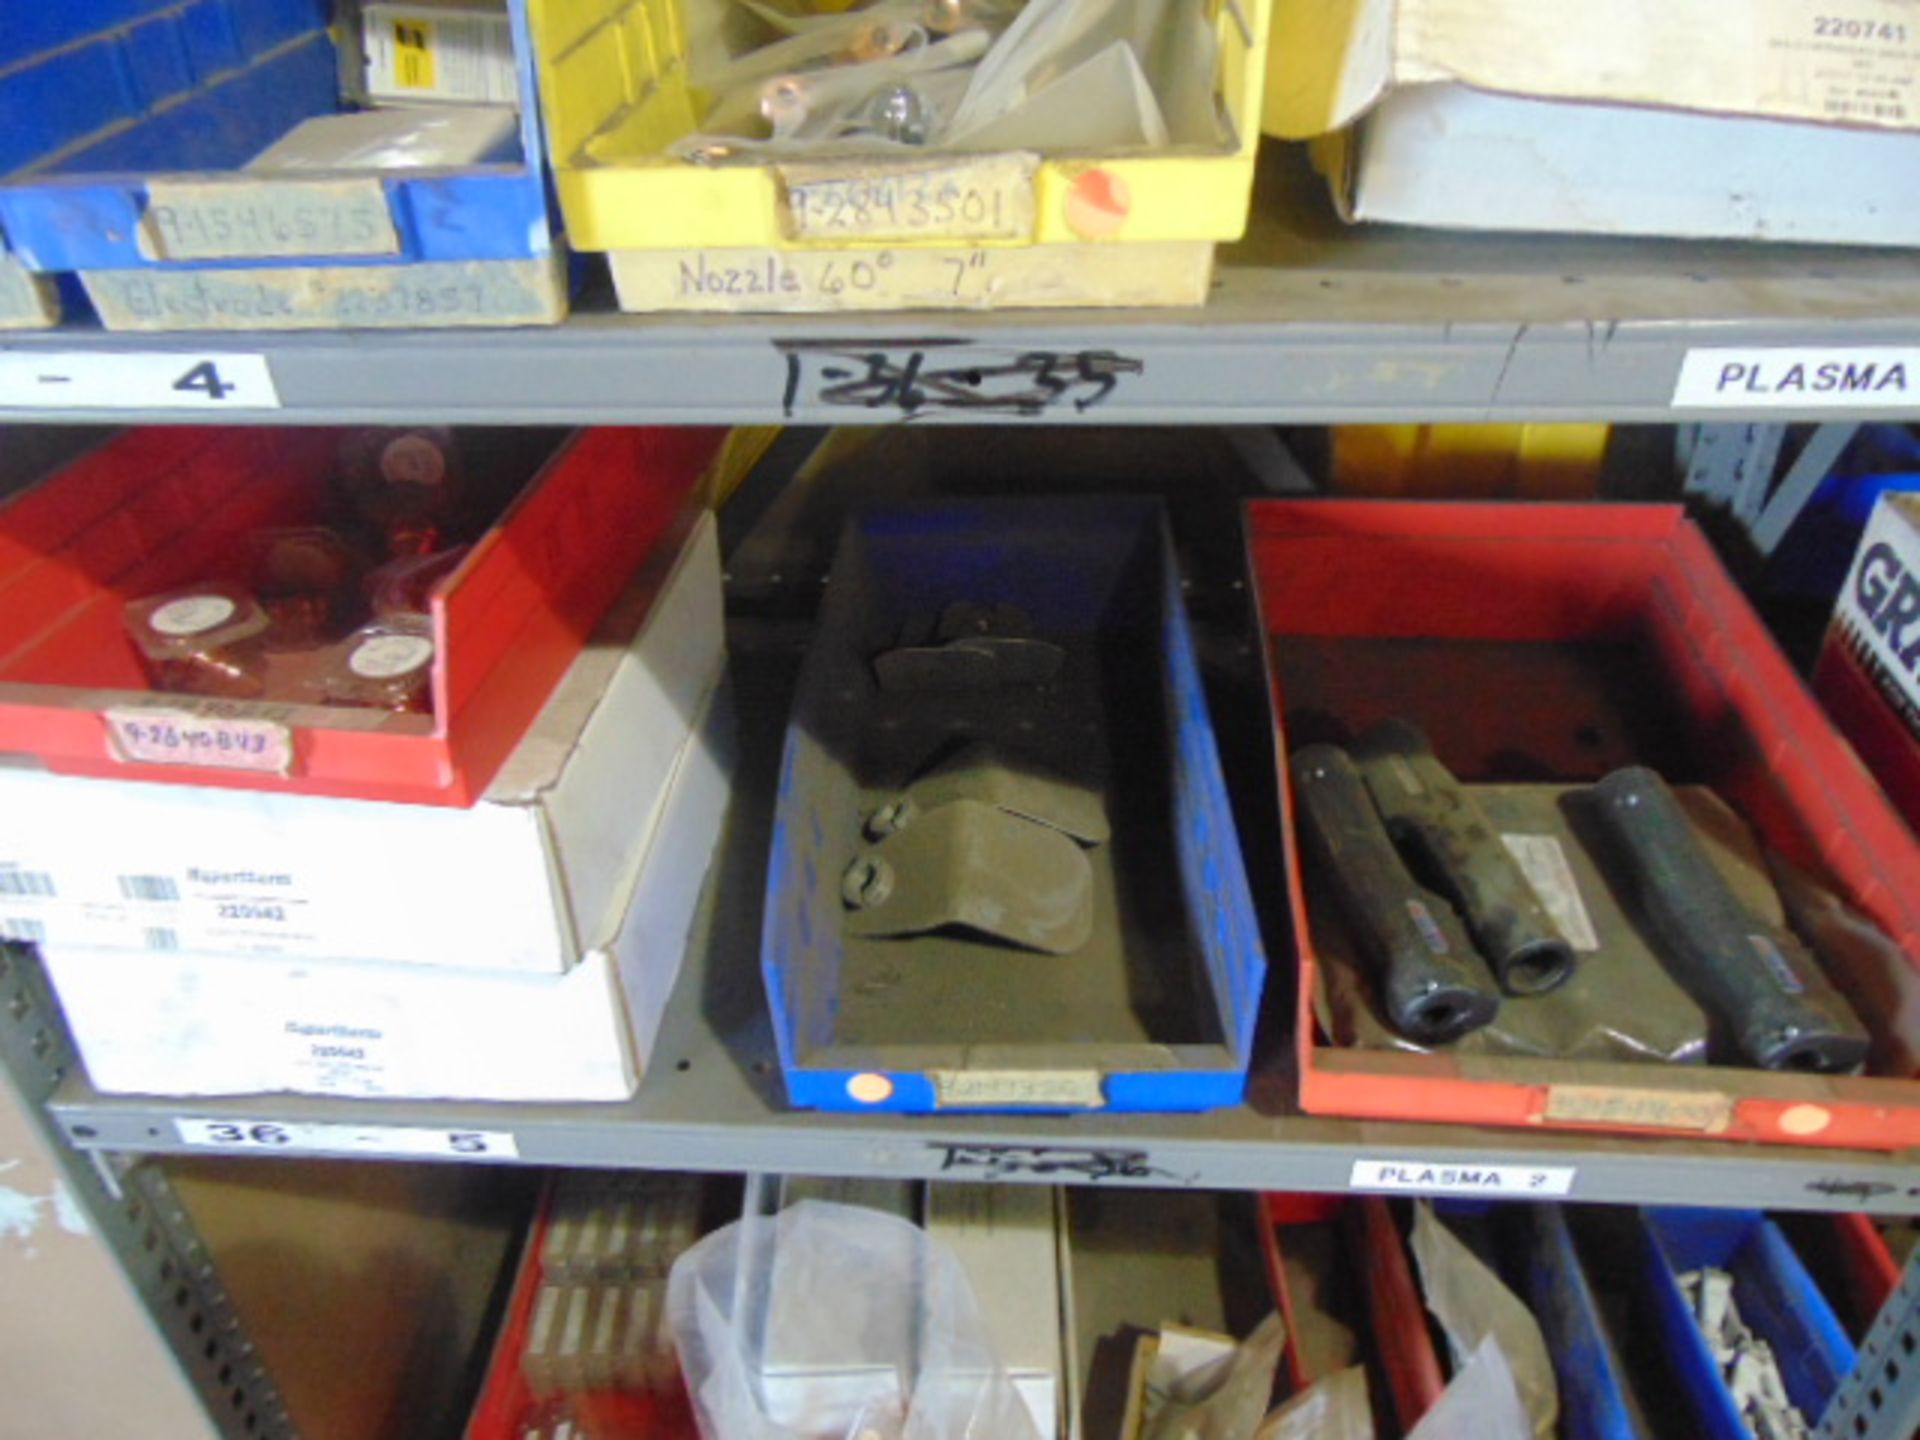 LOT OF PLASMA REPLACEMENT PARTS, assorted (in one section of shelving) - Image 3 of 5